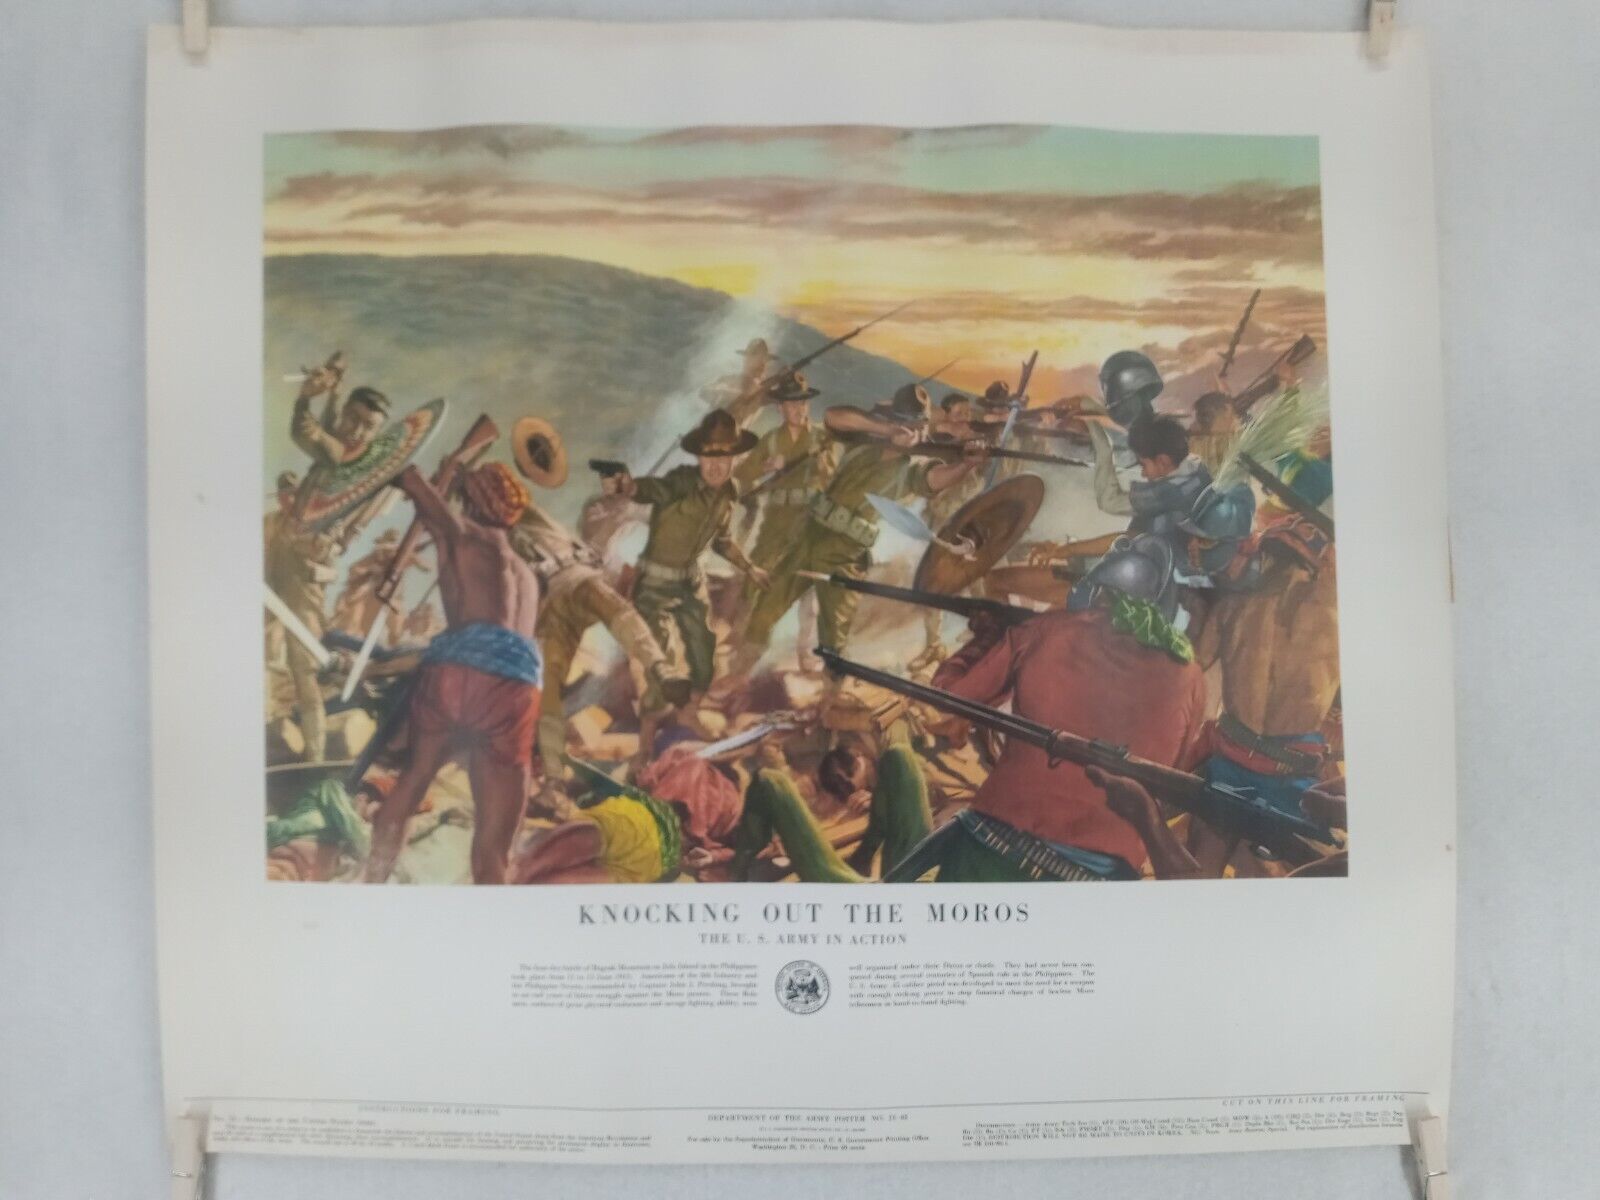 1953 Print of the 1913 Knocking Out The Moros US Army Poster 24x20  No. 21-48